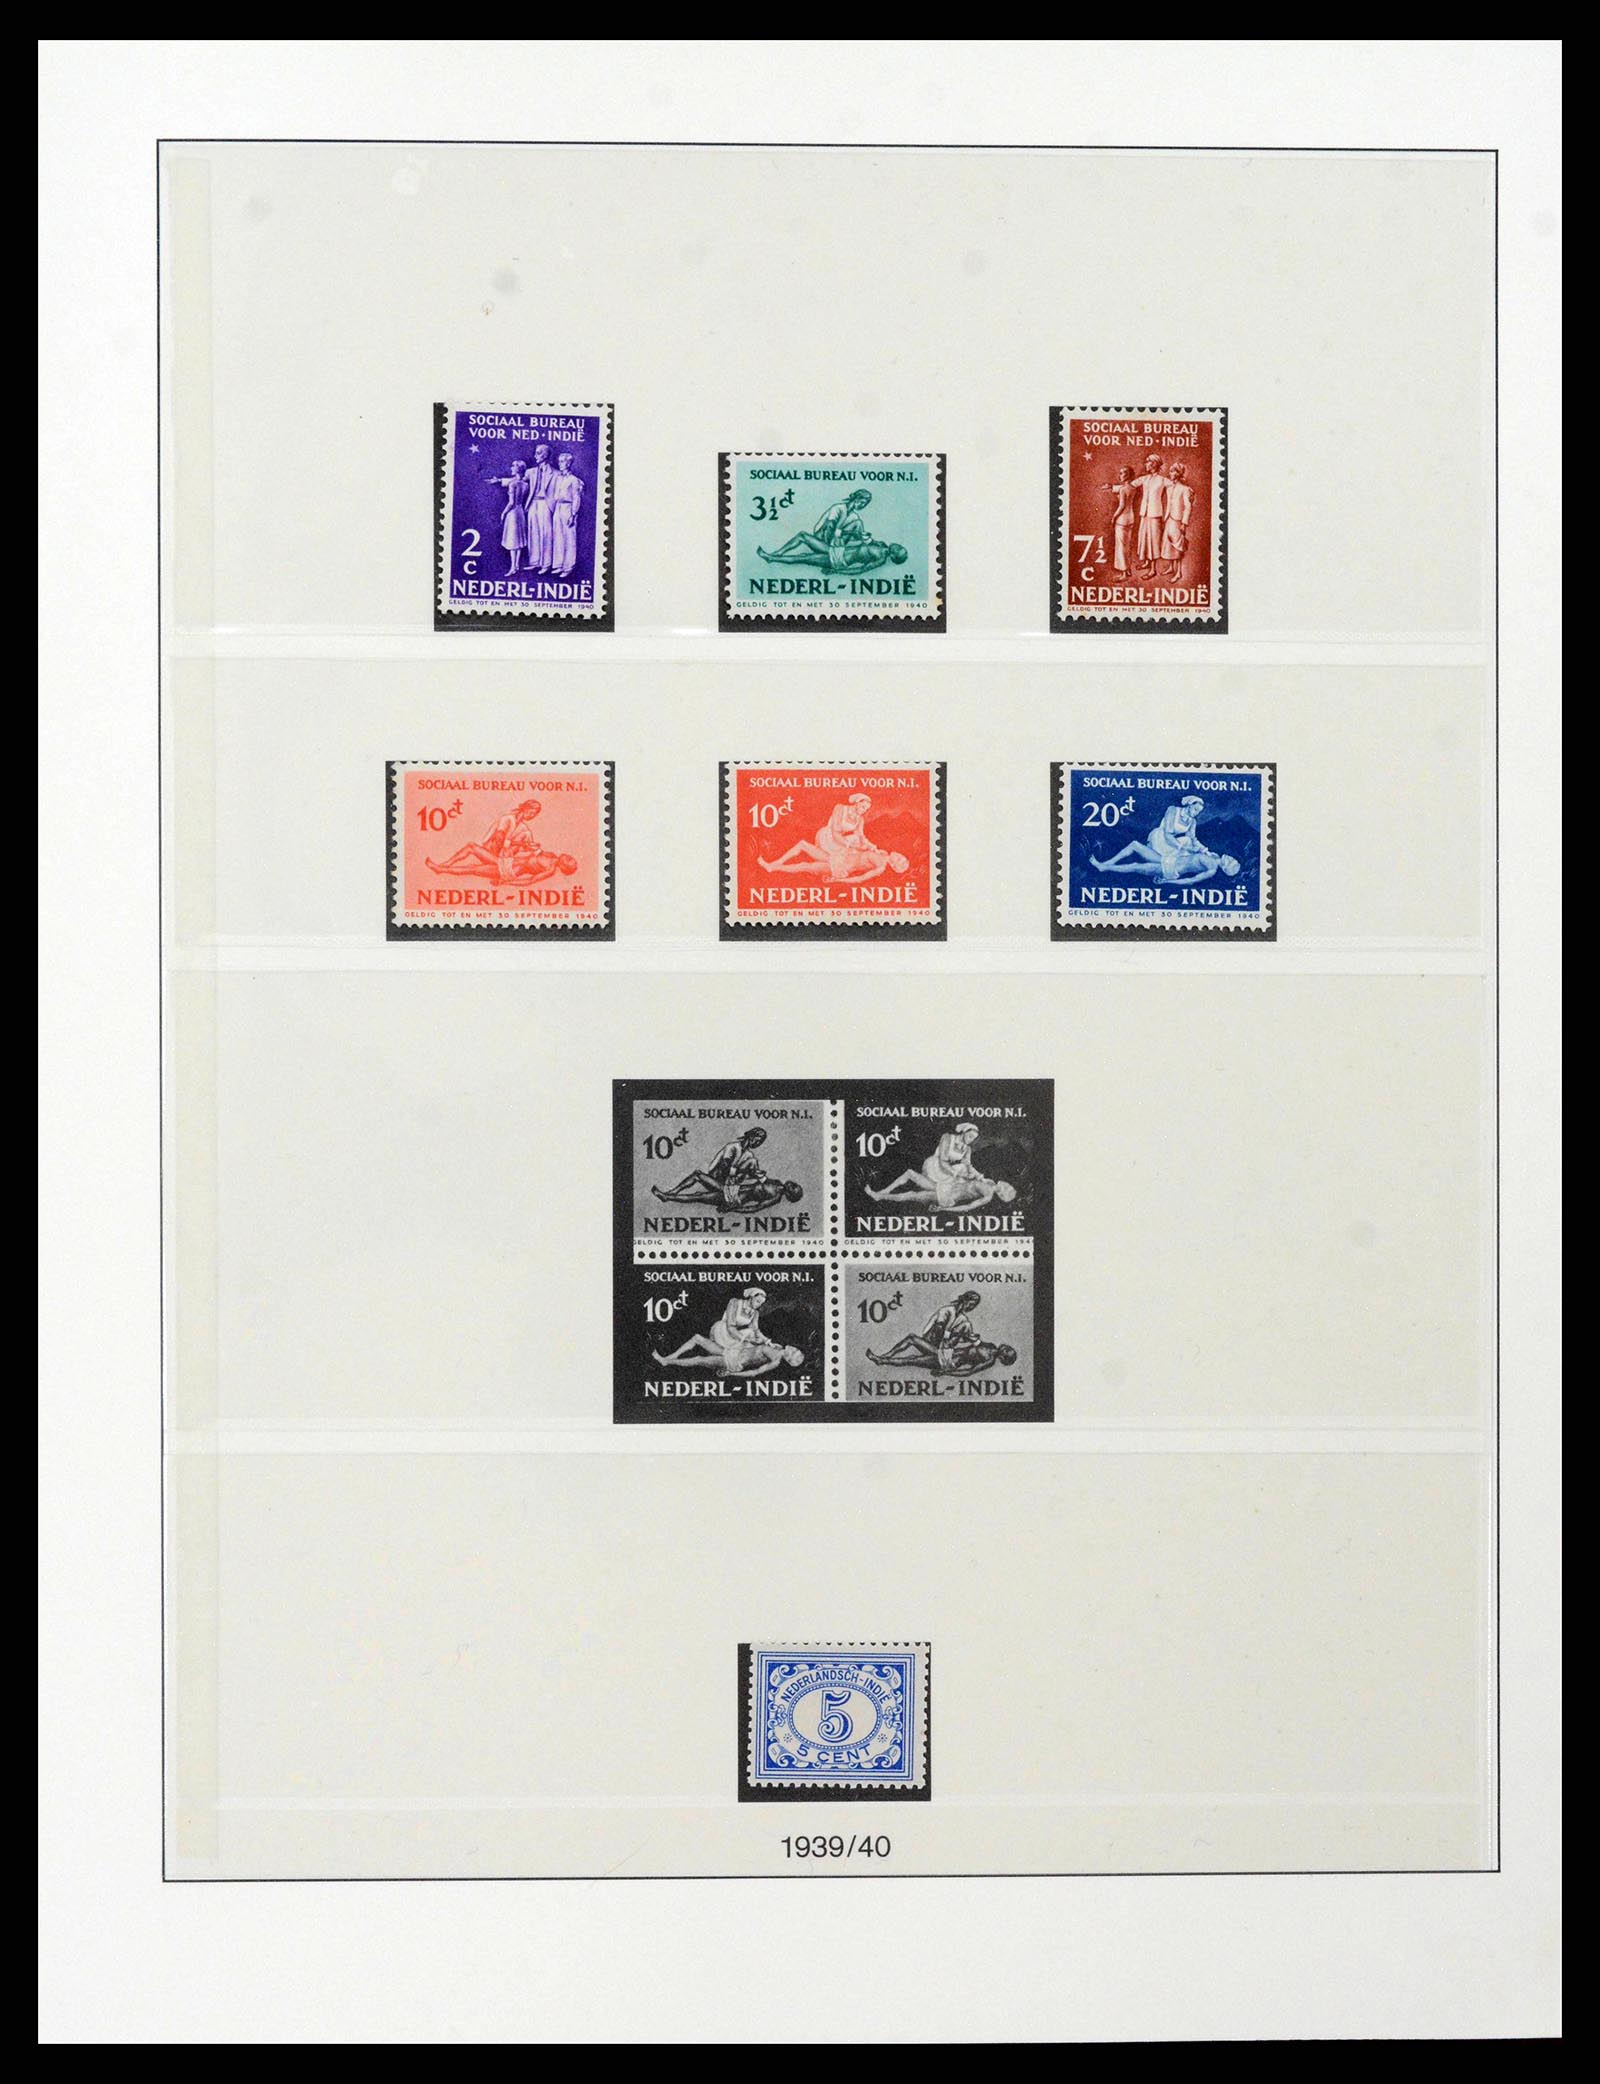 38583 0016 - Stamp collection 38583 Dutch east Indies 1909-1949.